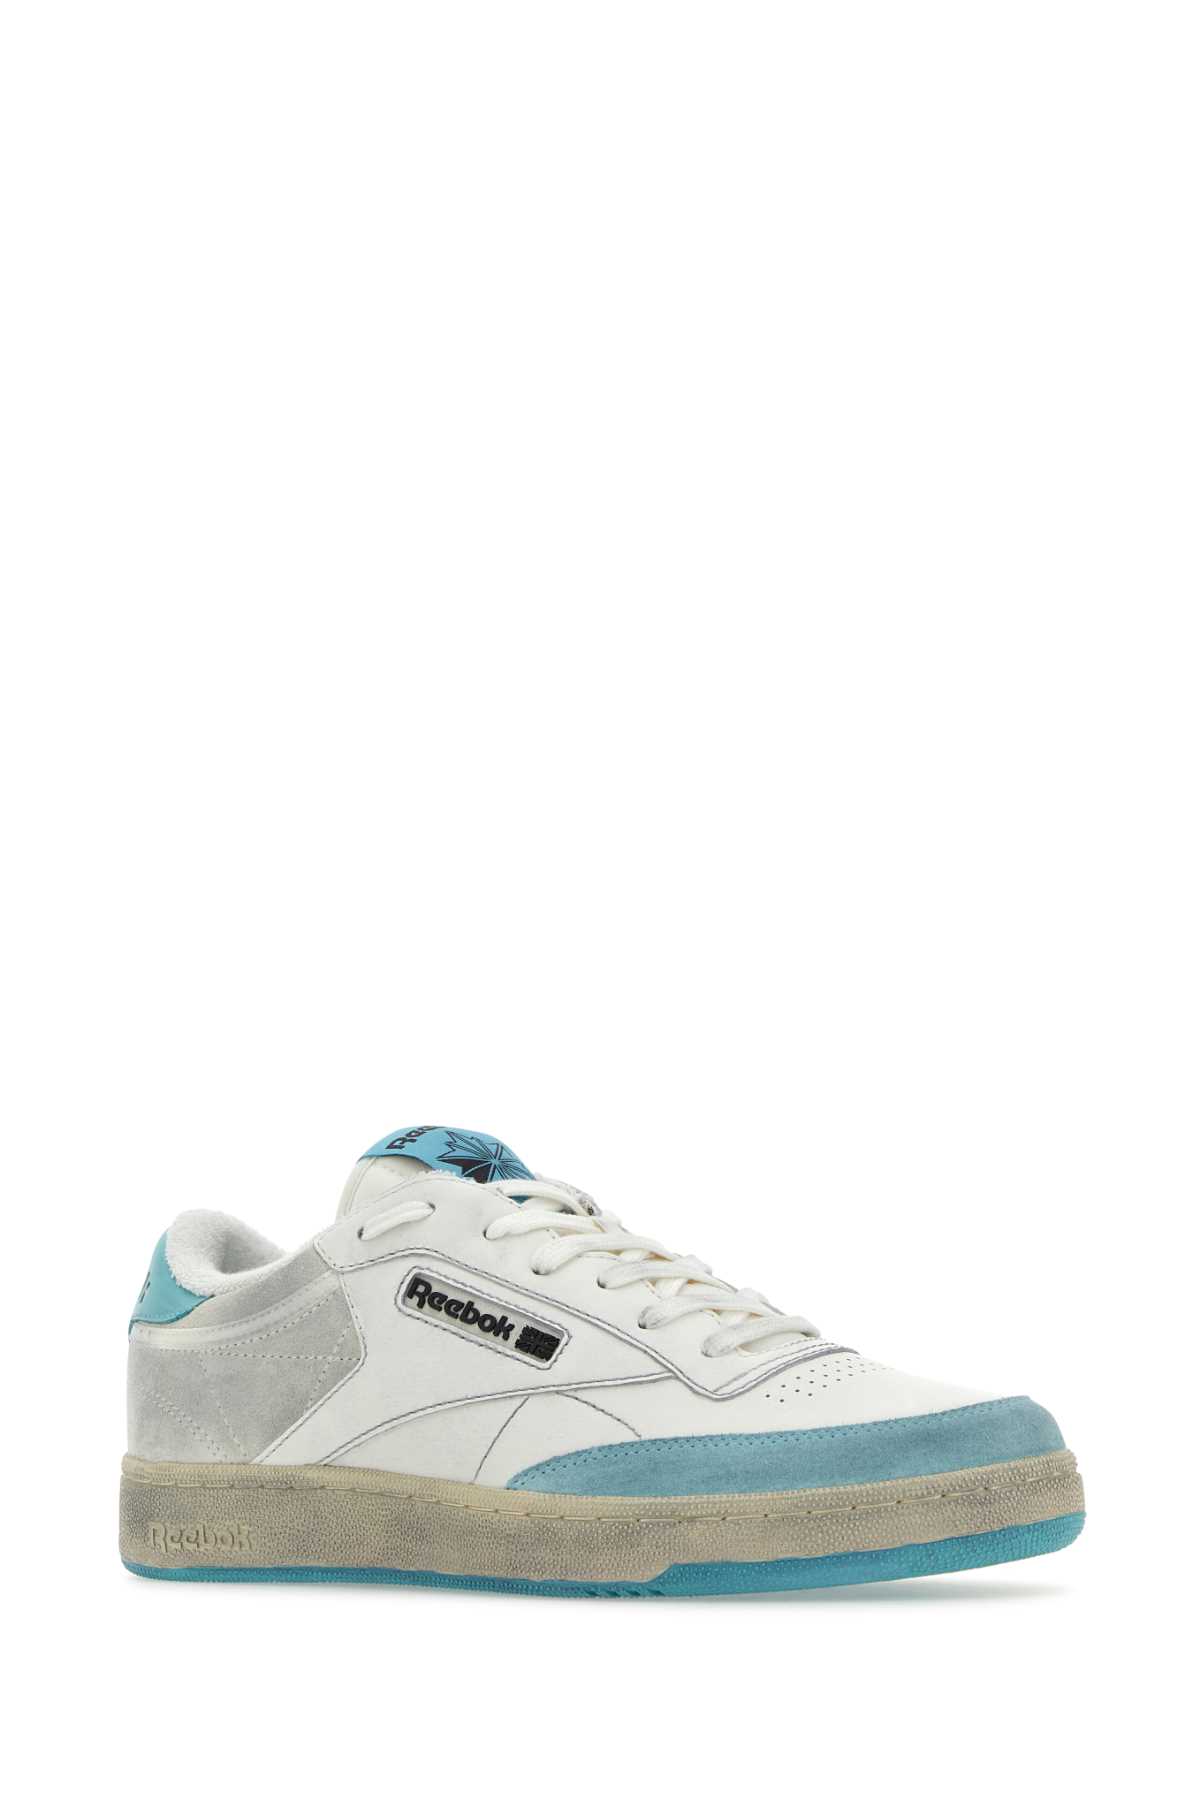 Reebok Two-tone Leather And Suede Club C Sneakers In Whiteligh